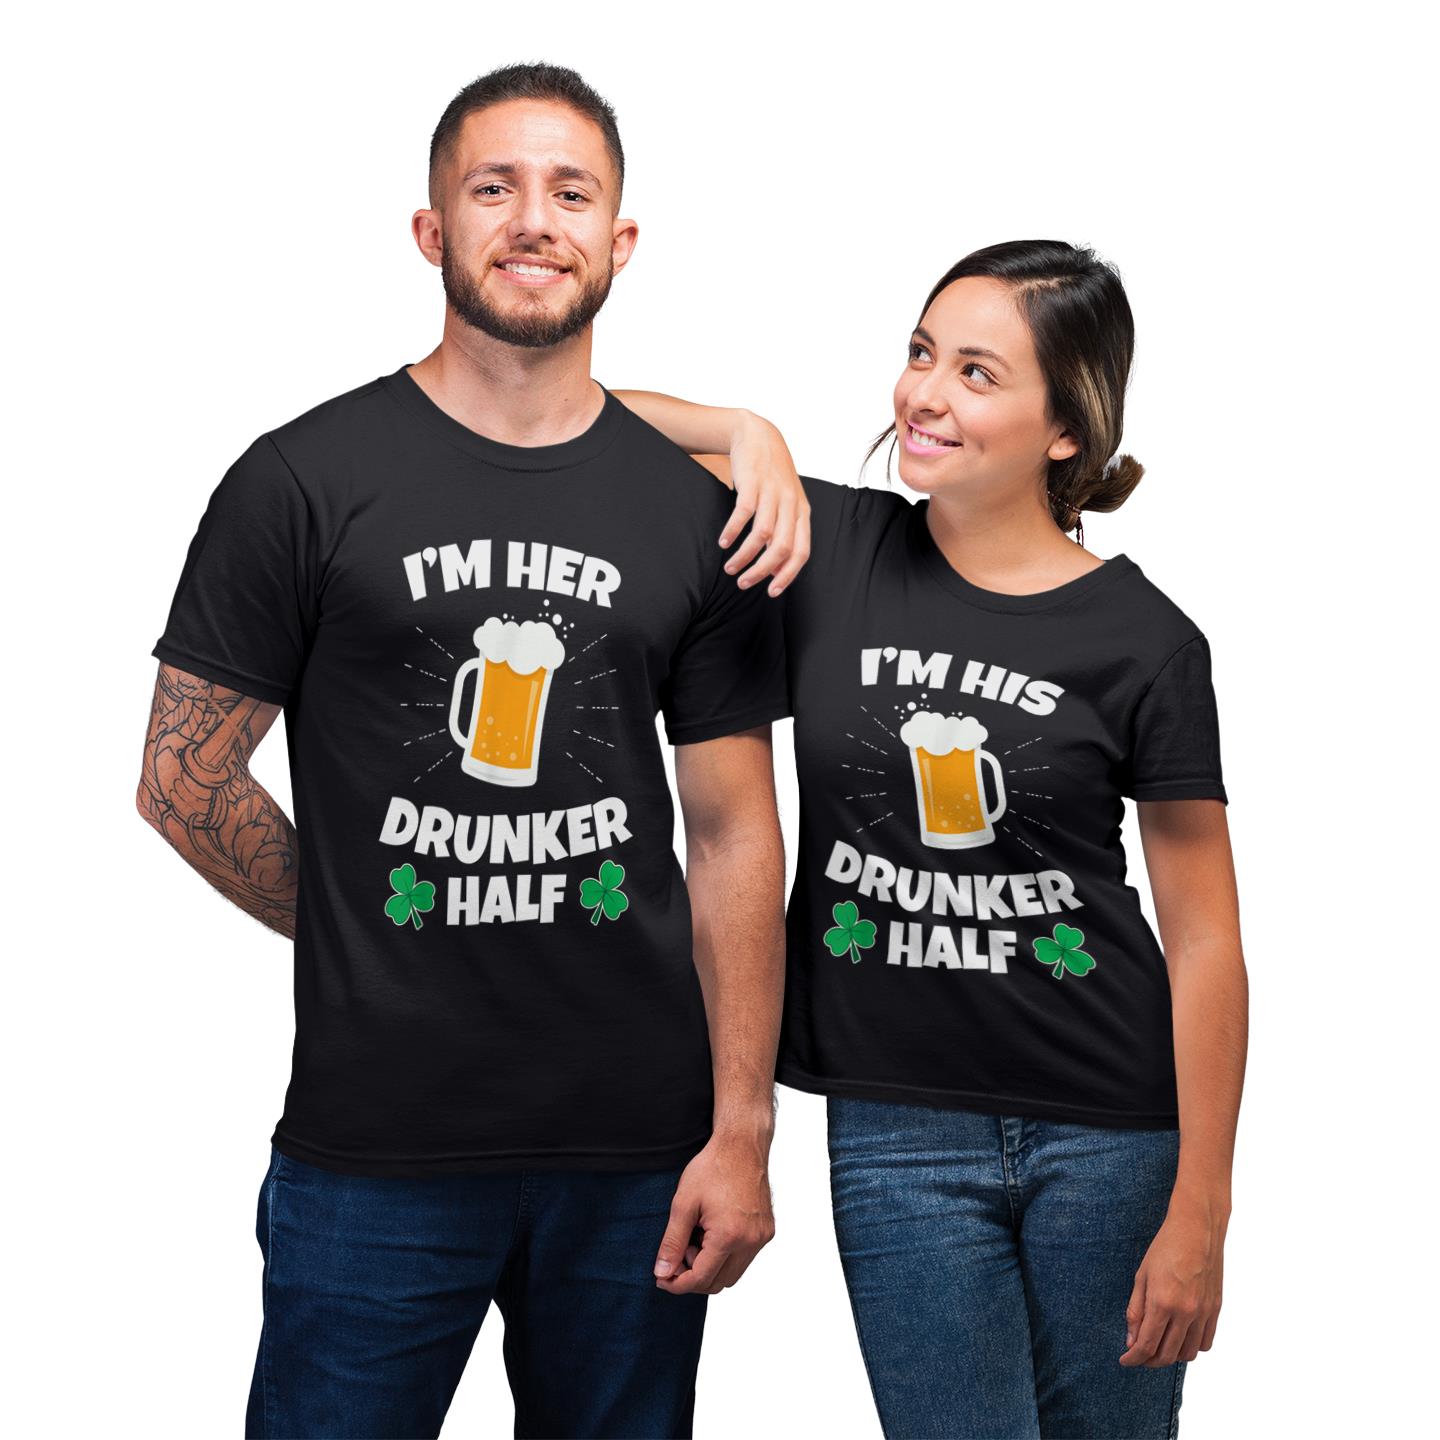 I?m His And Her Drunker Half St Patrick?s Day Shirt For Couple Lover Matching T-shirt